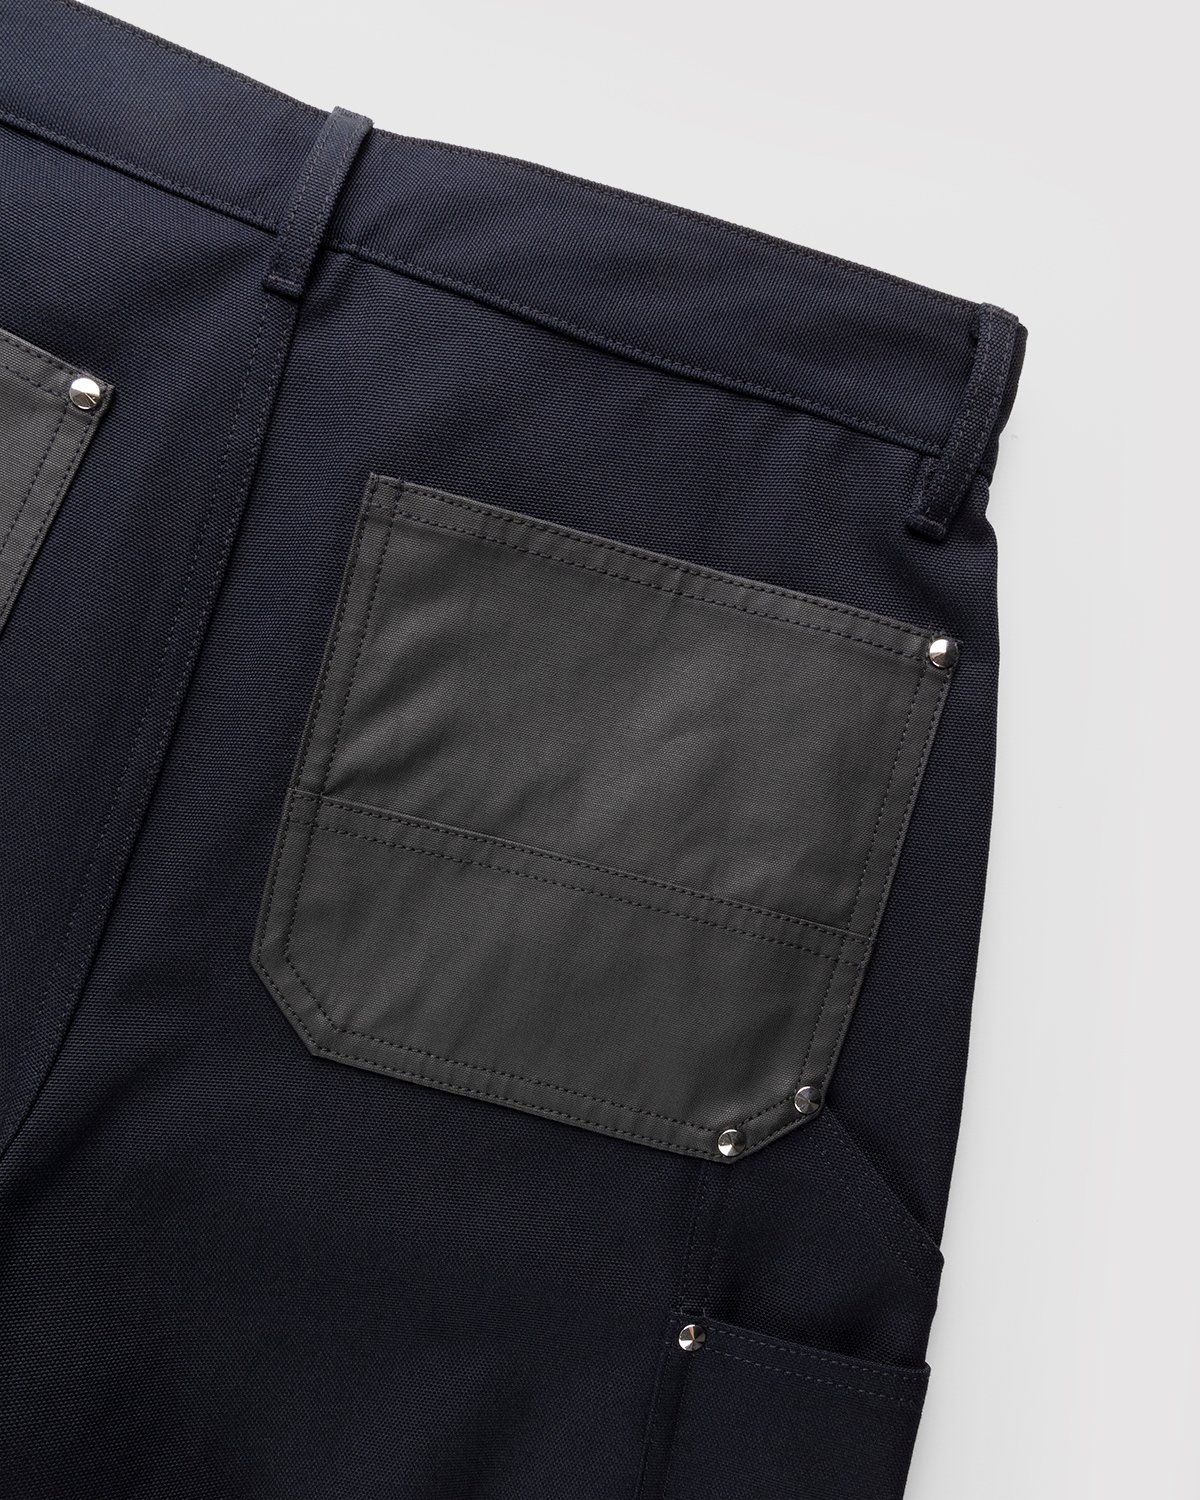 BOSS x Phipps - Water-Repellent Trousers Black - Clothing - Black - Image 4